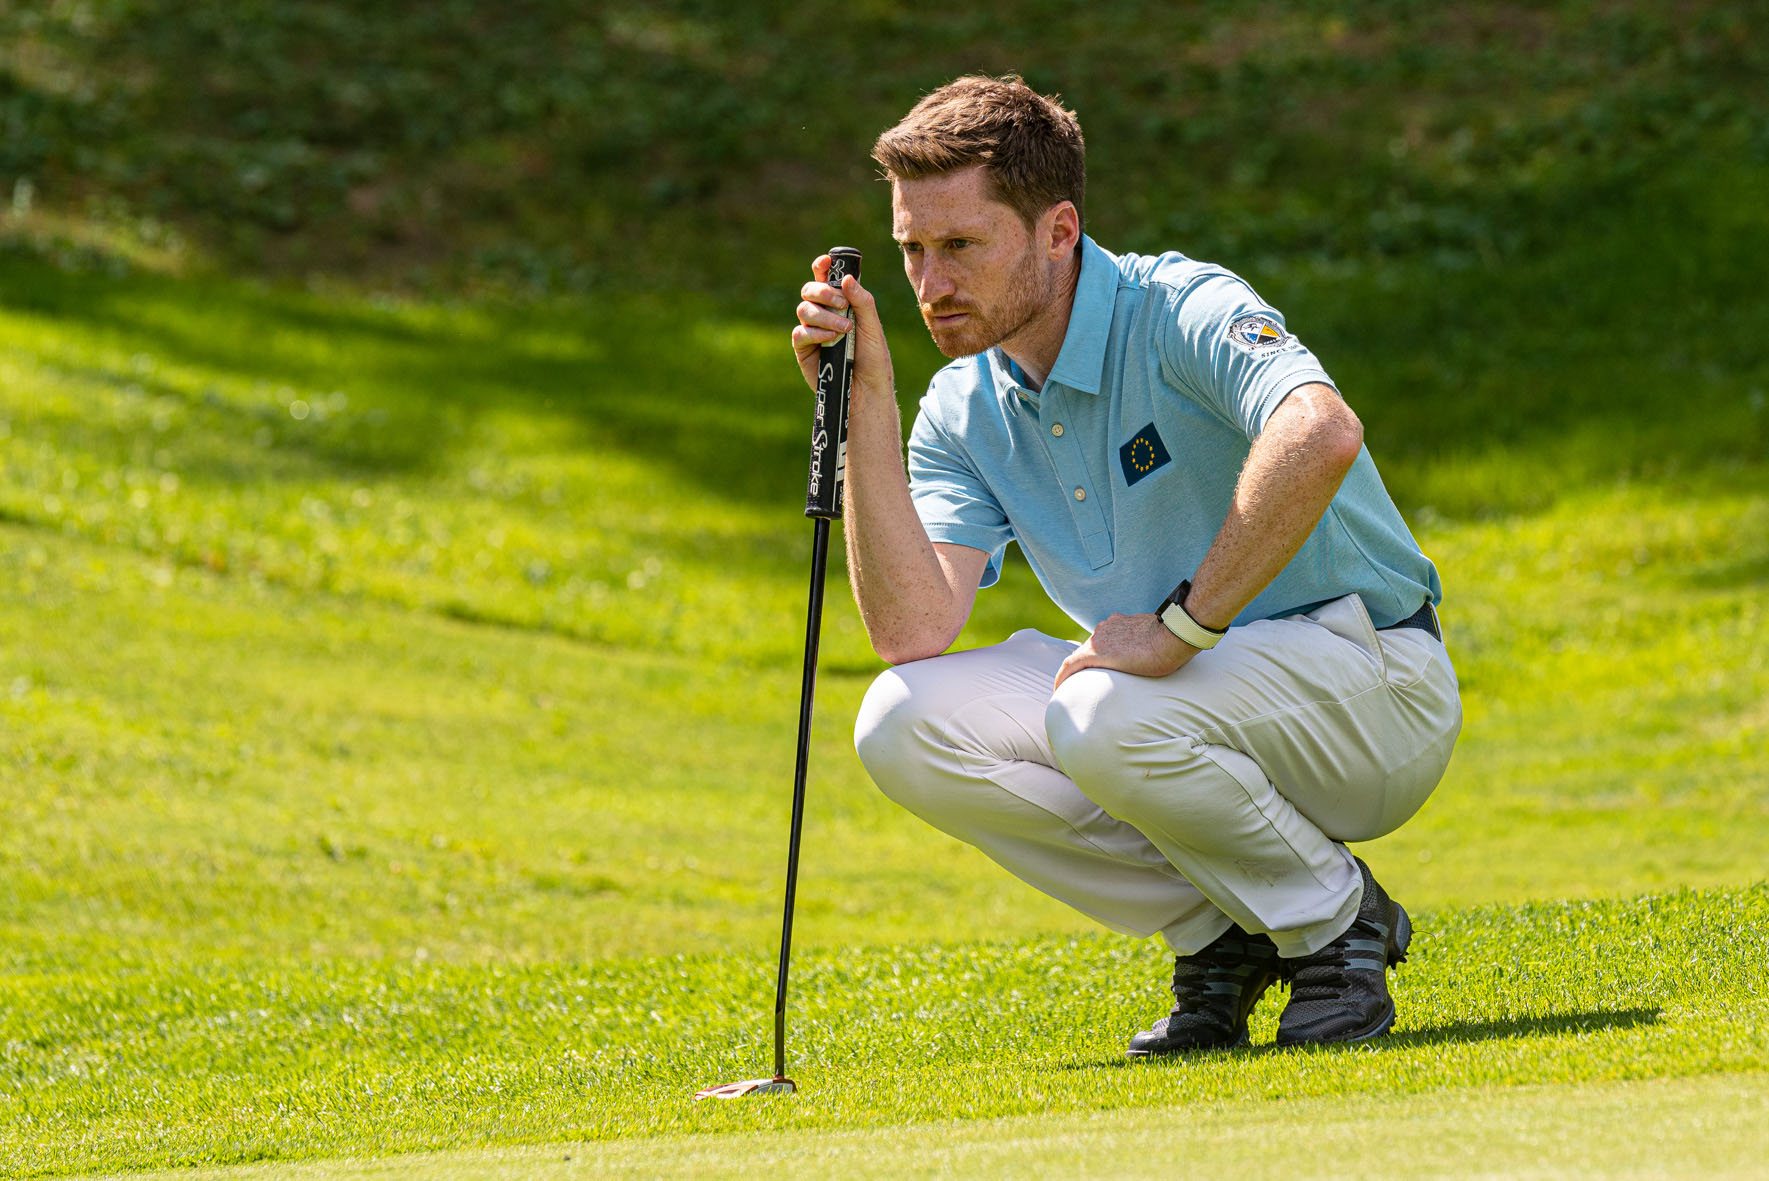 Team Europe golfer at the St. Moritz Celebrity Golf Cup 2019